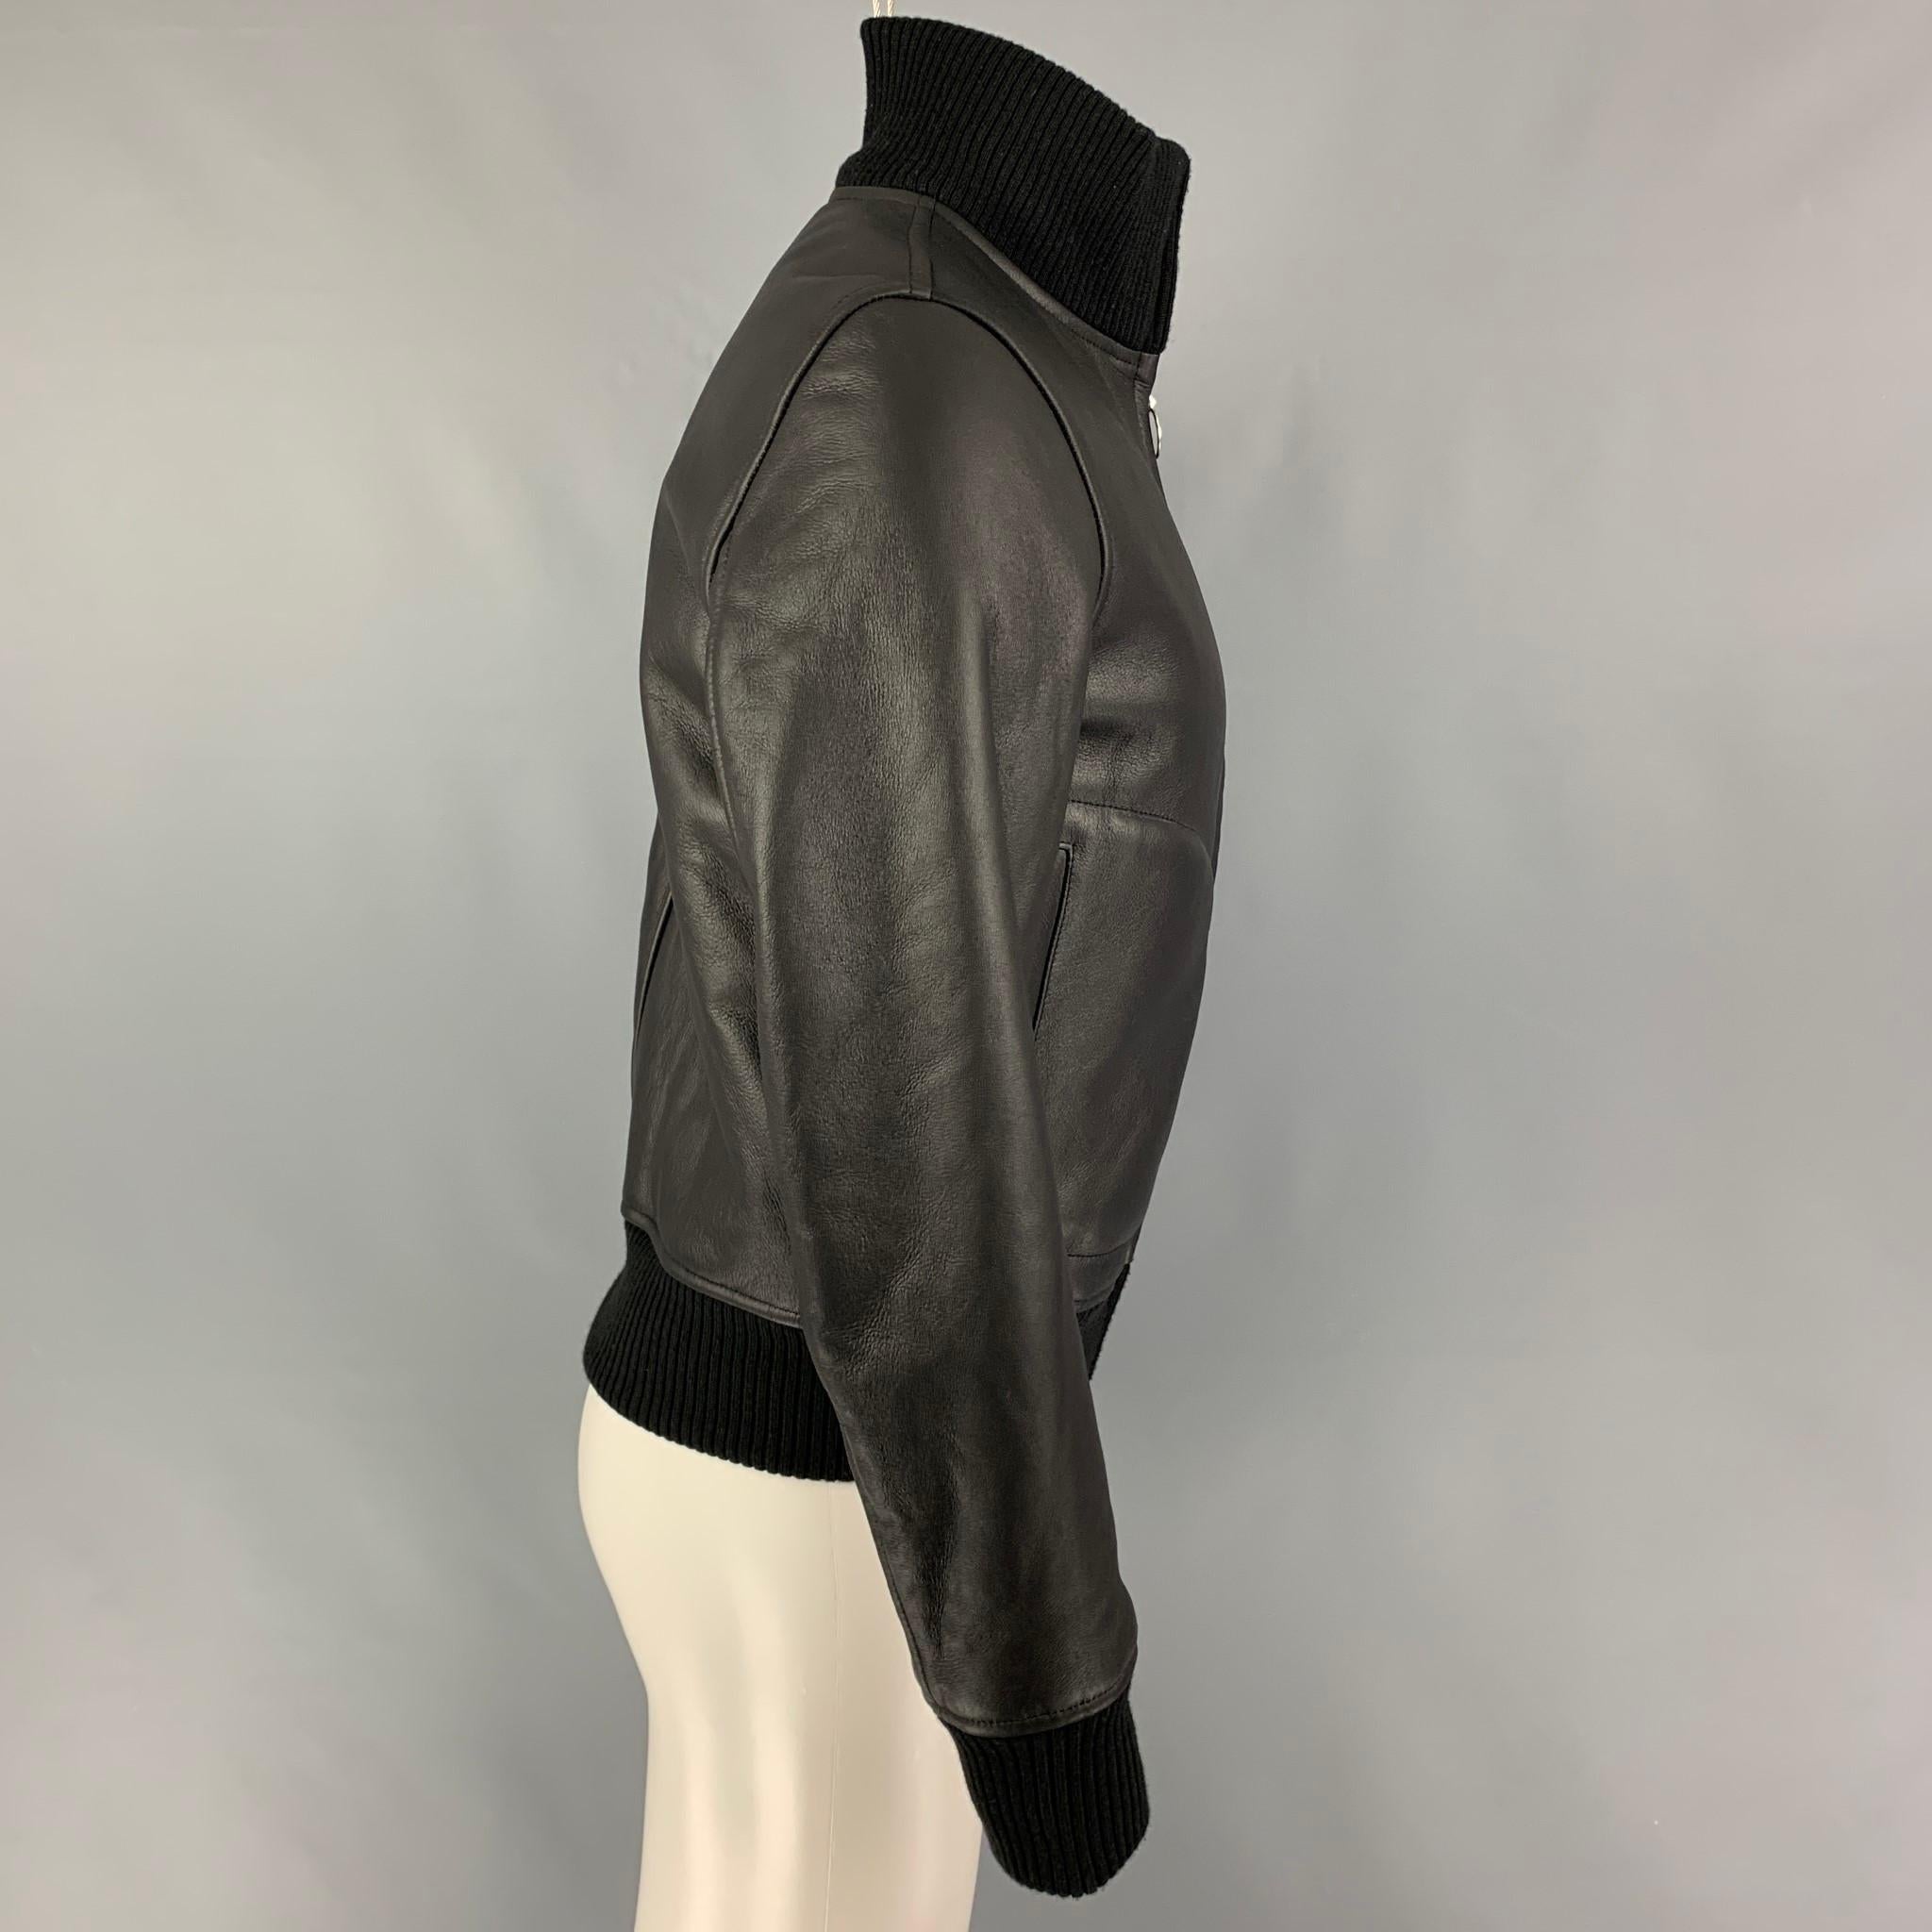 SANDRO jacket comes in a black leather featuring a bomber style, high collar, ribbed hem, zipper pockets, and a full zip up closure. 

Excellent Pre-Owned Condition.
Marked: XS
Original Retail Price: $1,890.00

Measurements:

Shoulder: 18 in.
Chest: